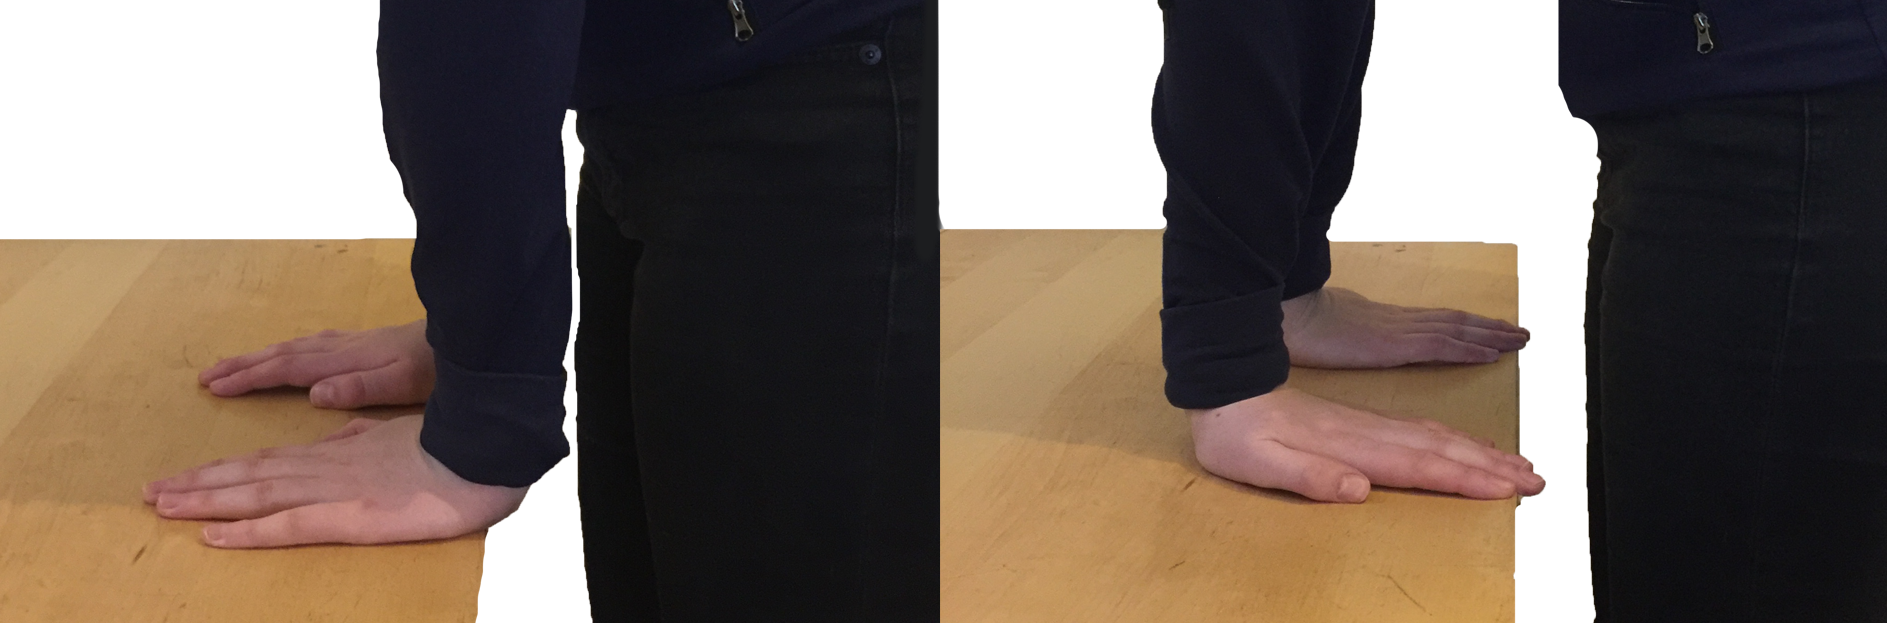 table stretching wrist physical therapy